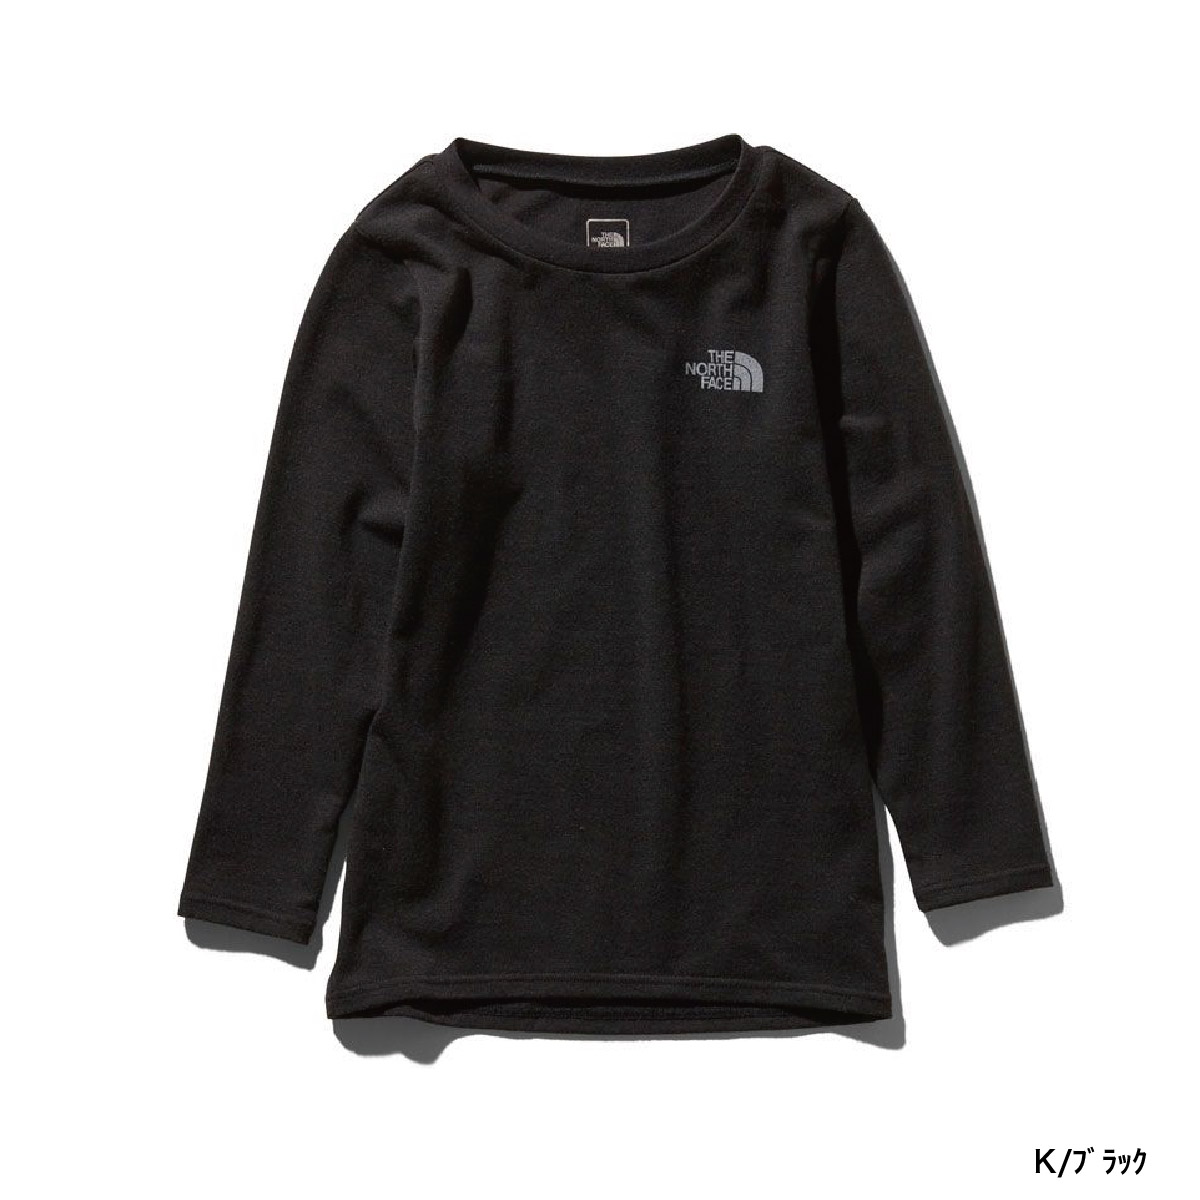 THE NORTH FACE the North Face youth undershirt 2020 L/S WARM Crew /  NUJ68105 19-20 NEW model